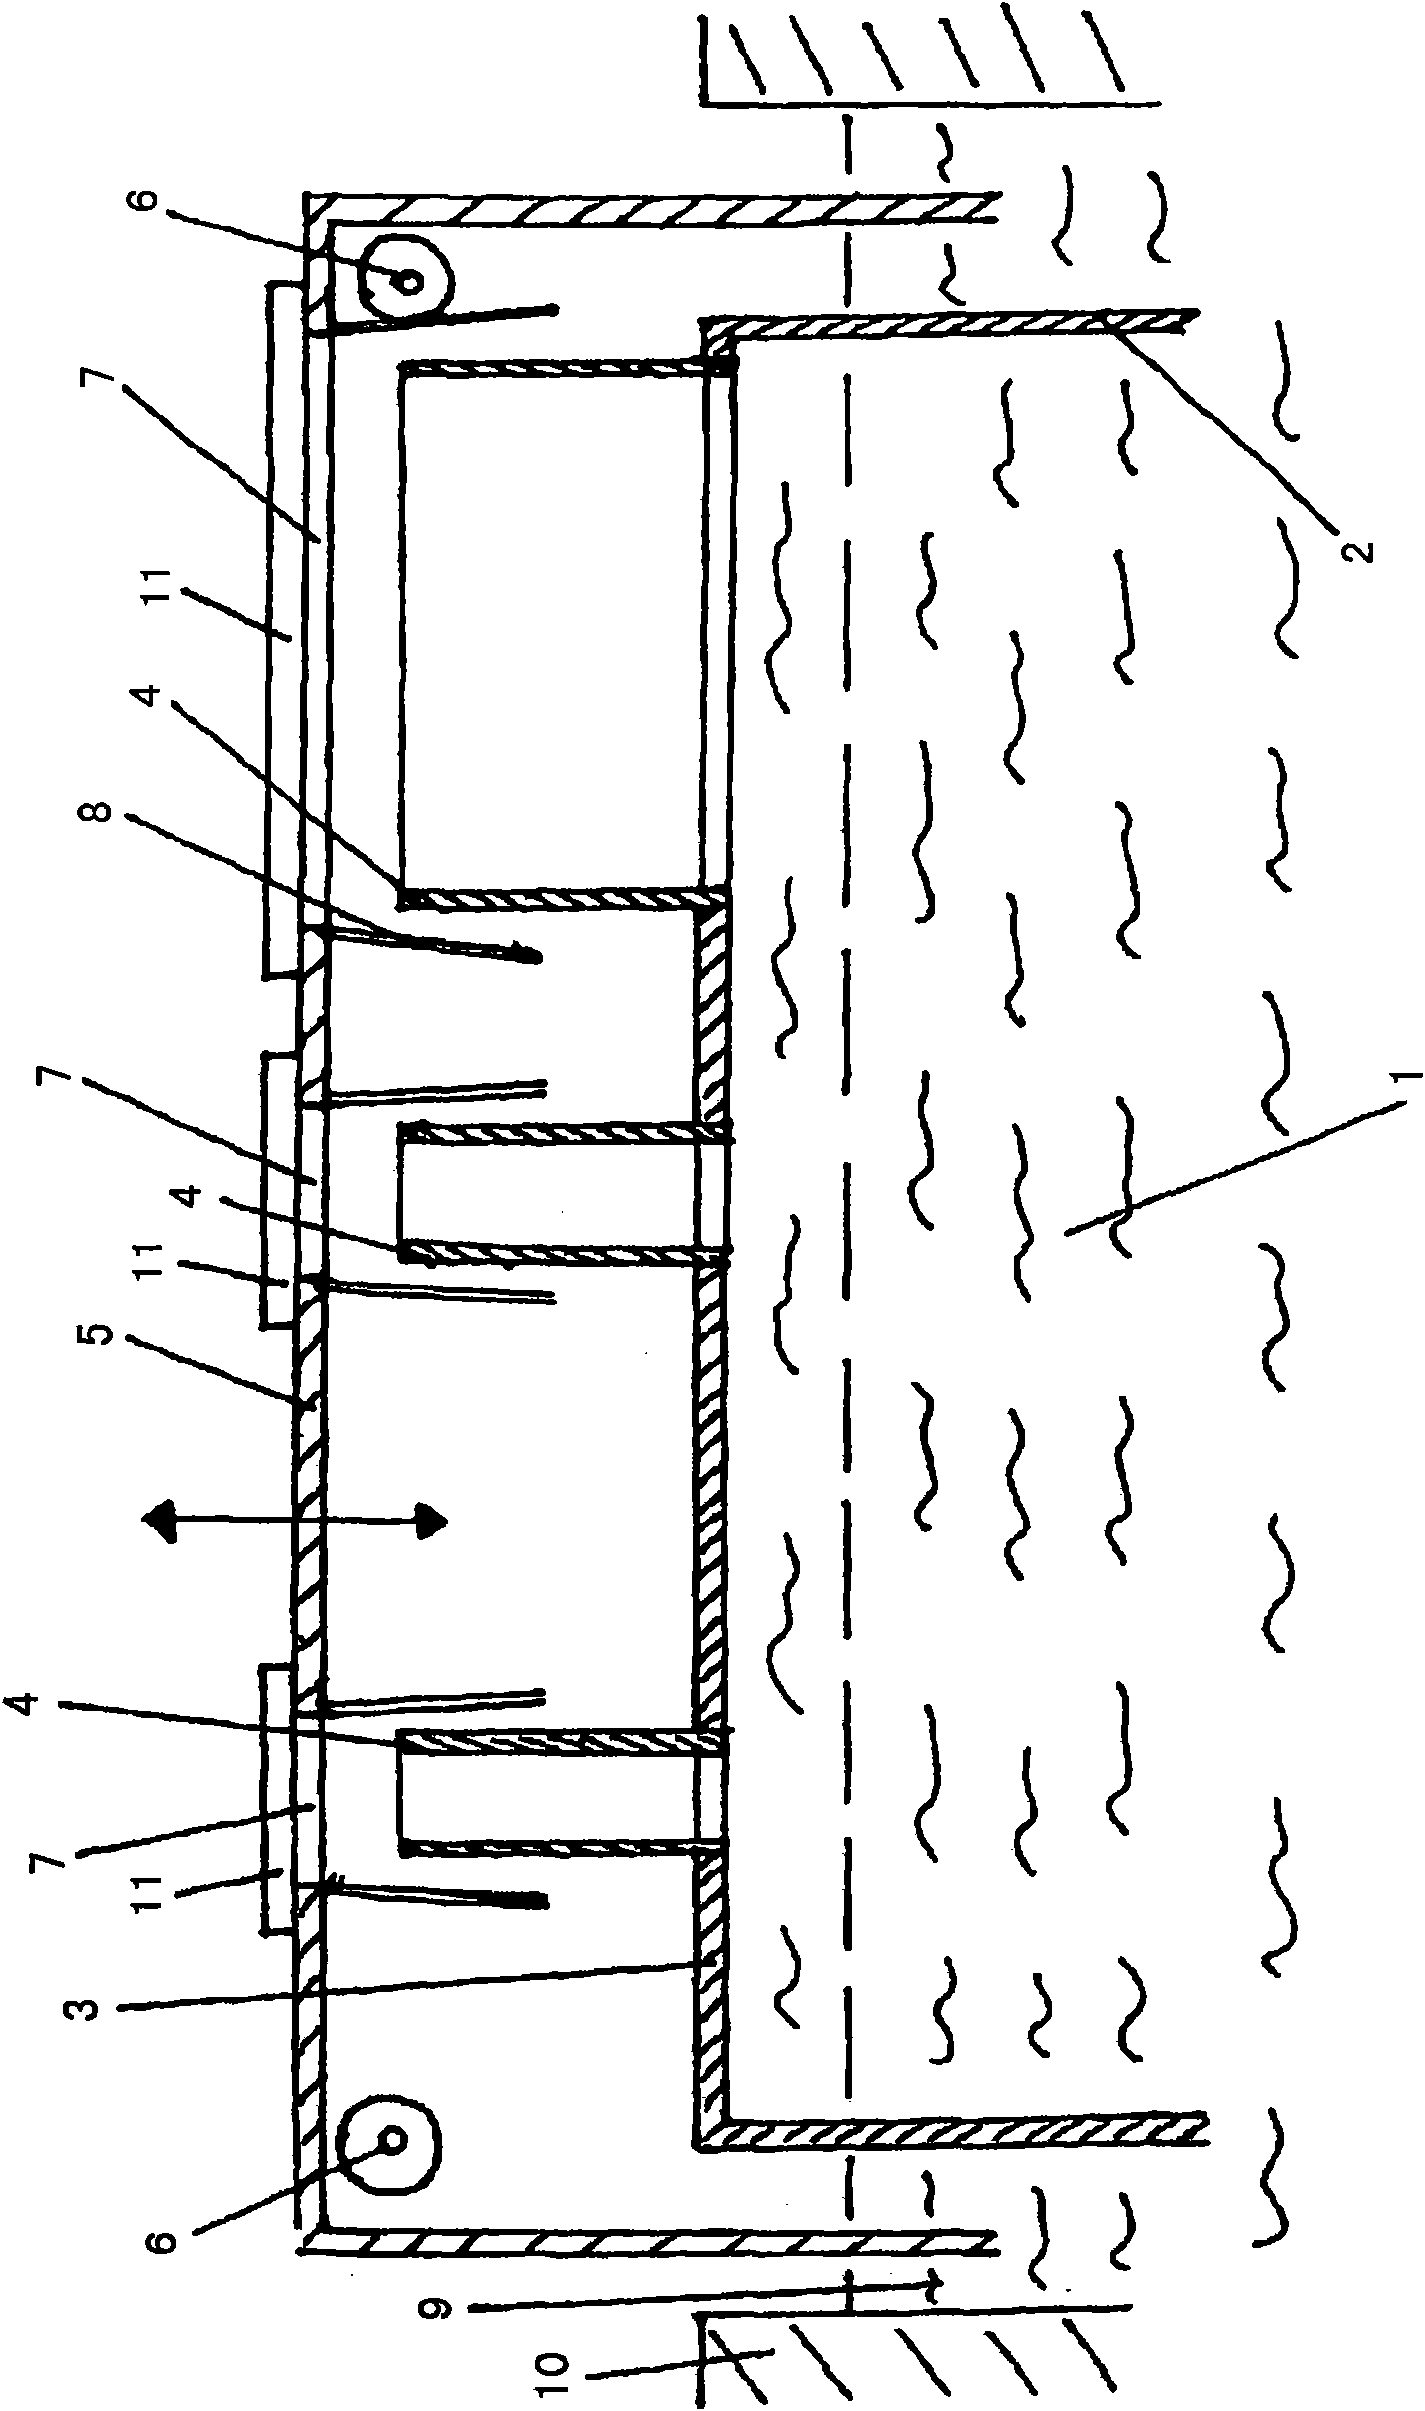 Device and method for selective soldering